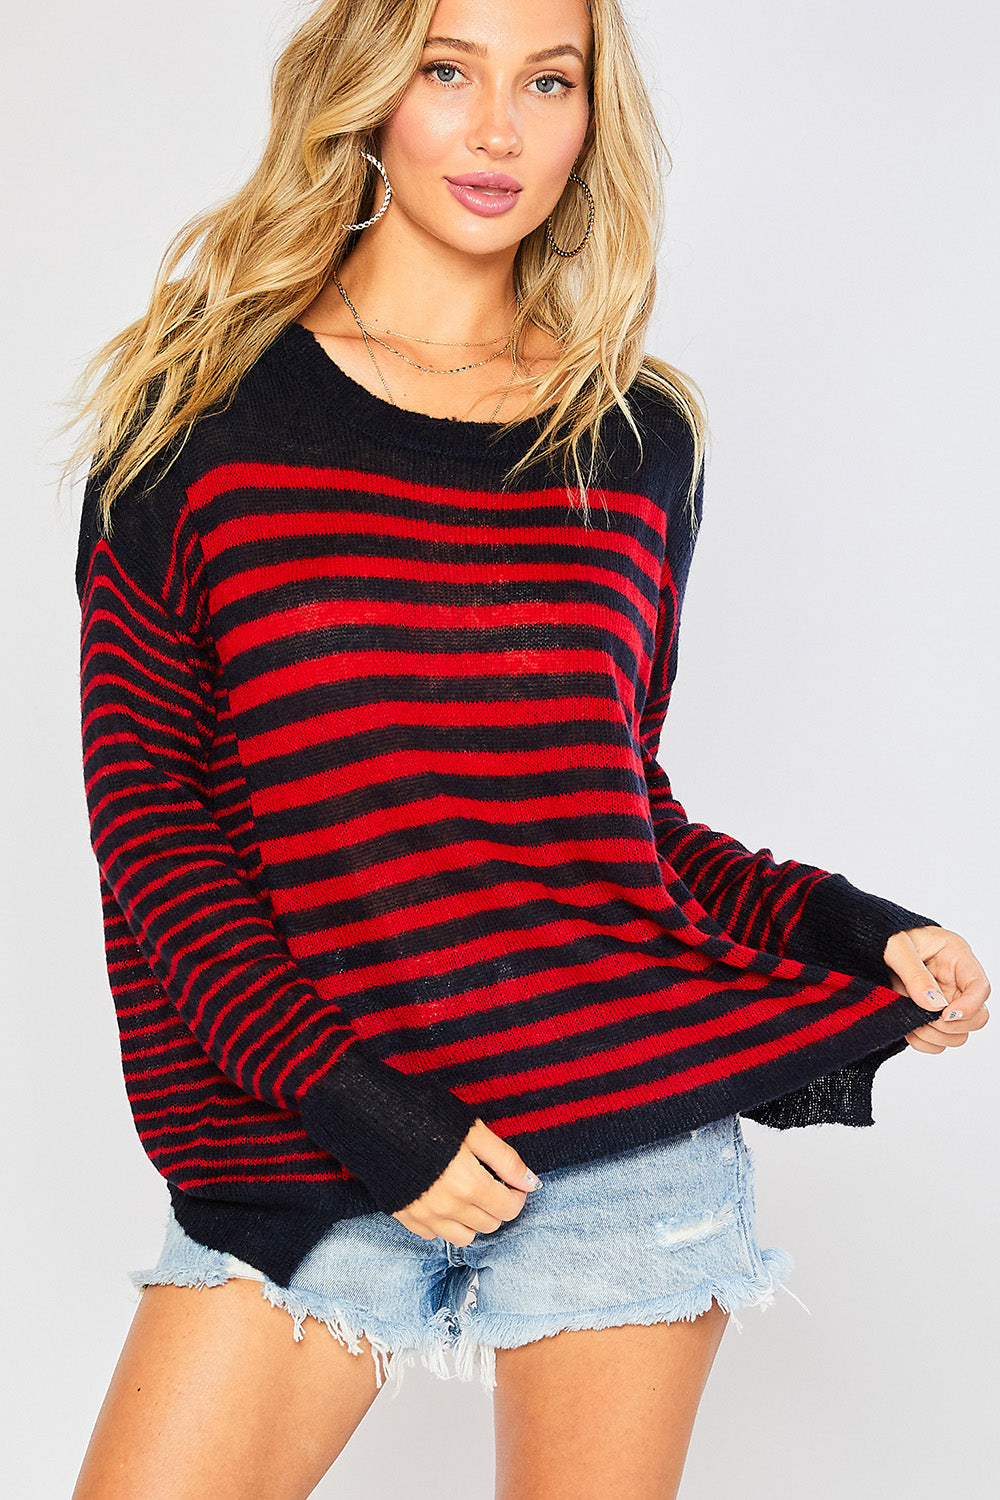 The Brielle Sweater